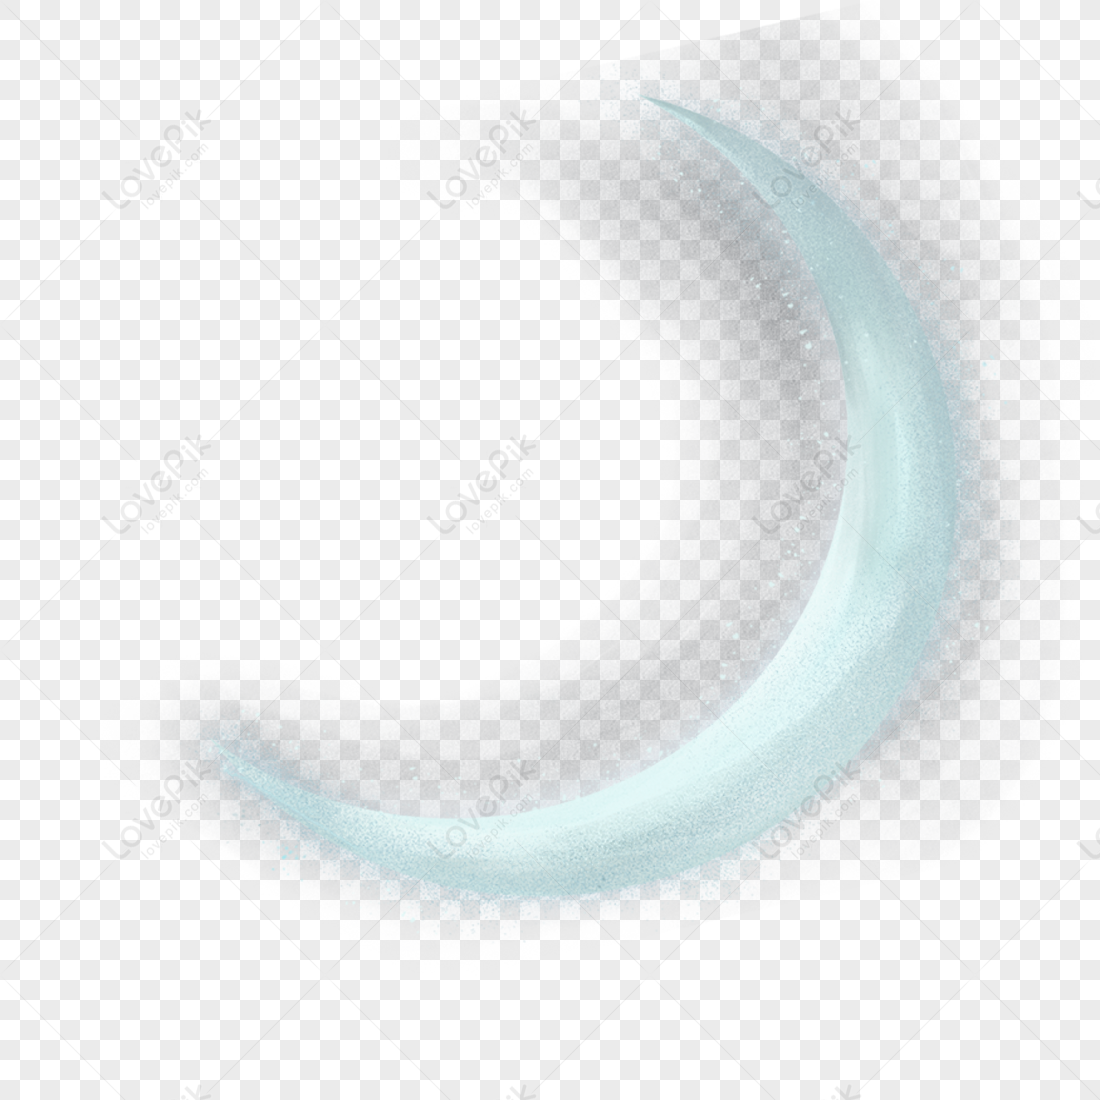 Moon PNG Image Free Download And Clipart Image For Free Download